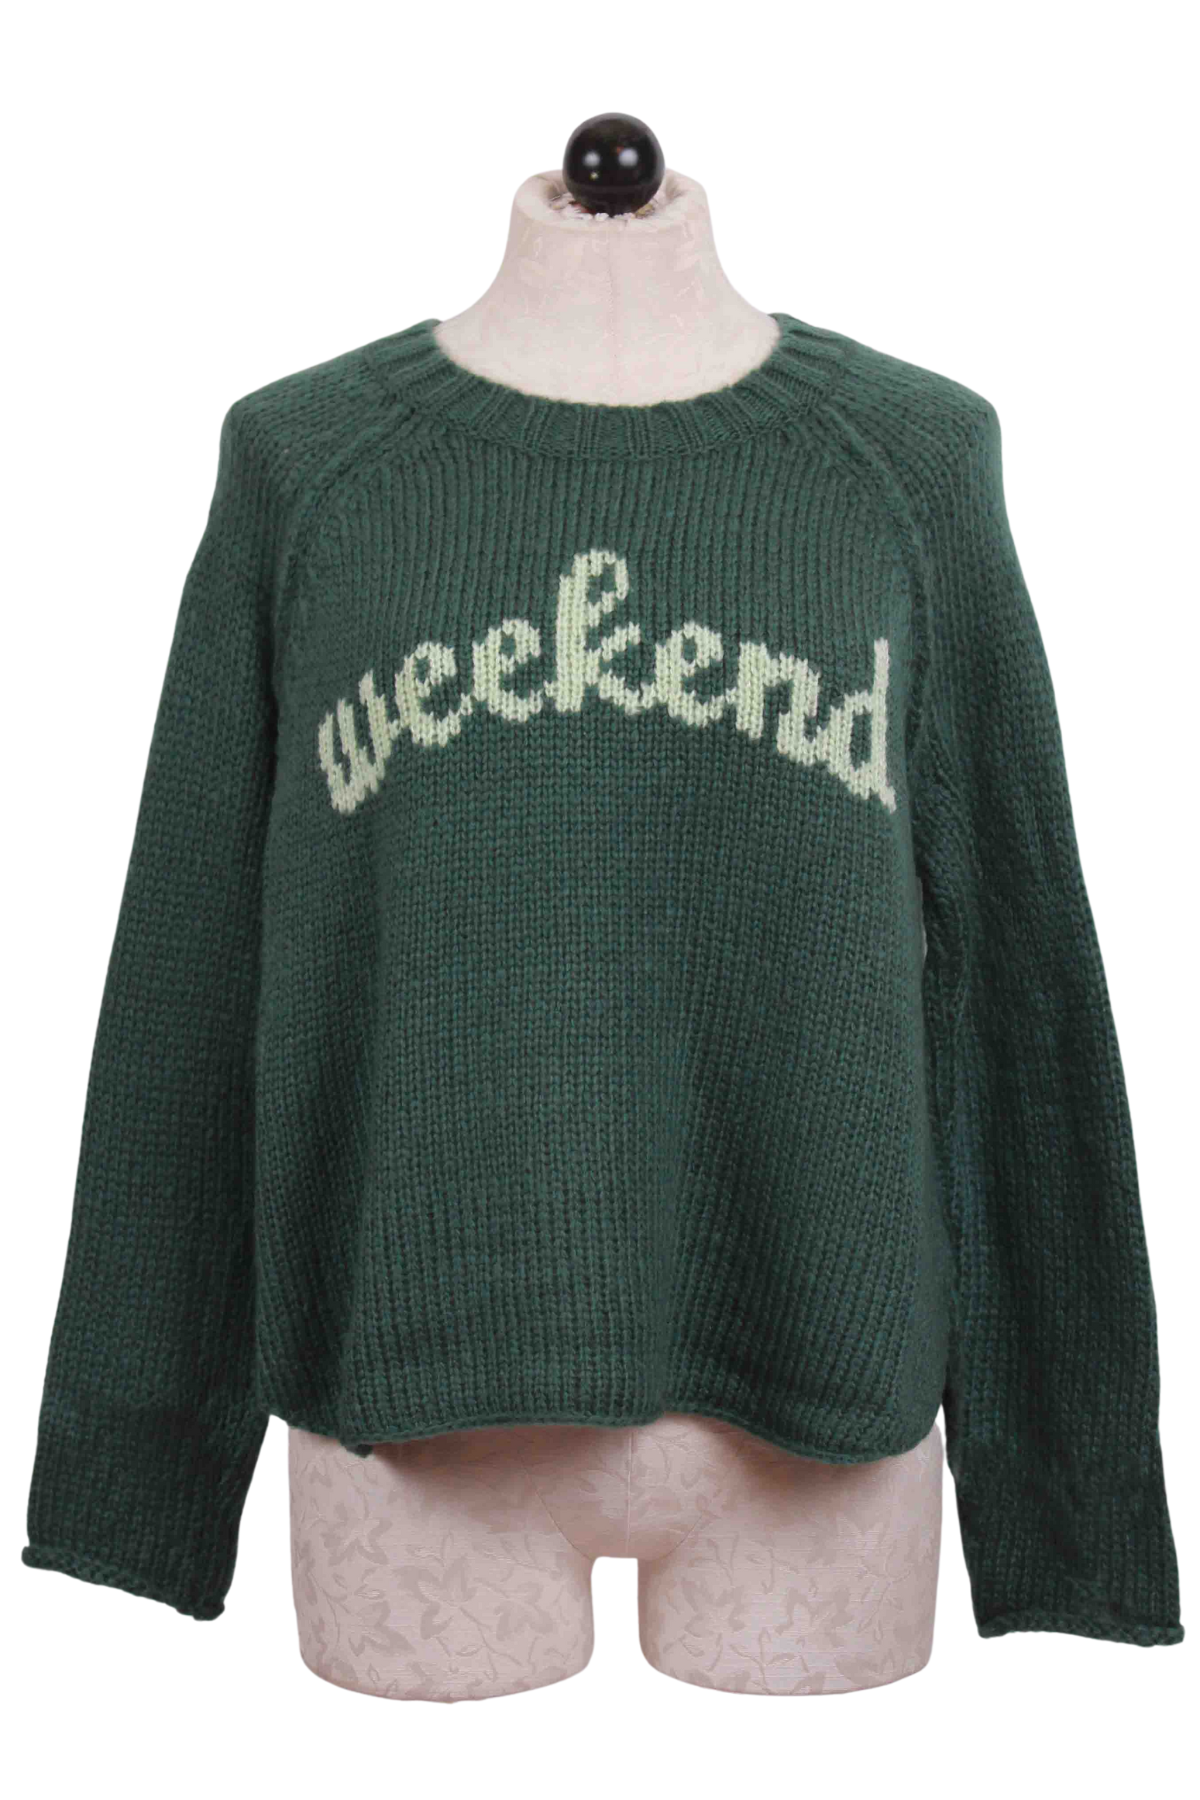 Juniper and Mojito colored Weekend Raglan Crew Sweater by Wooden Ships